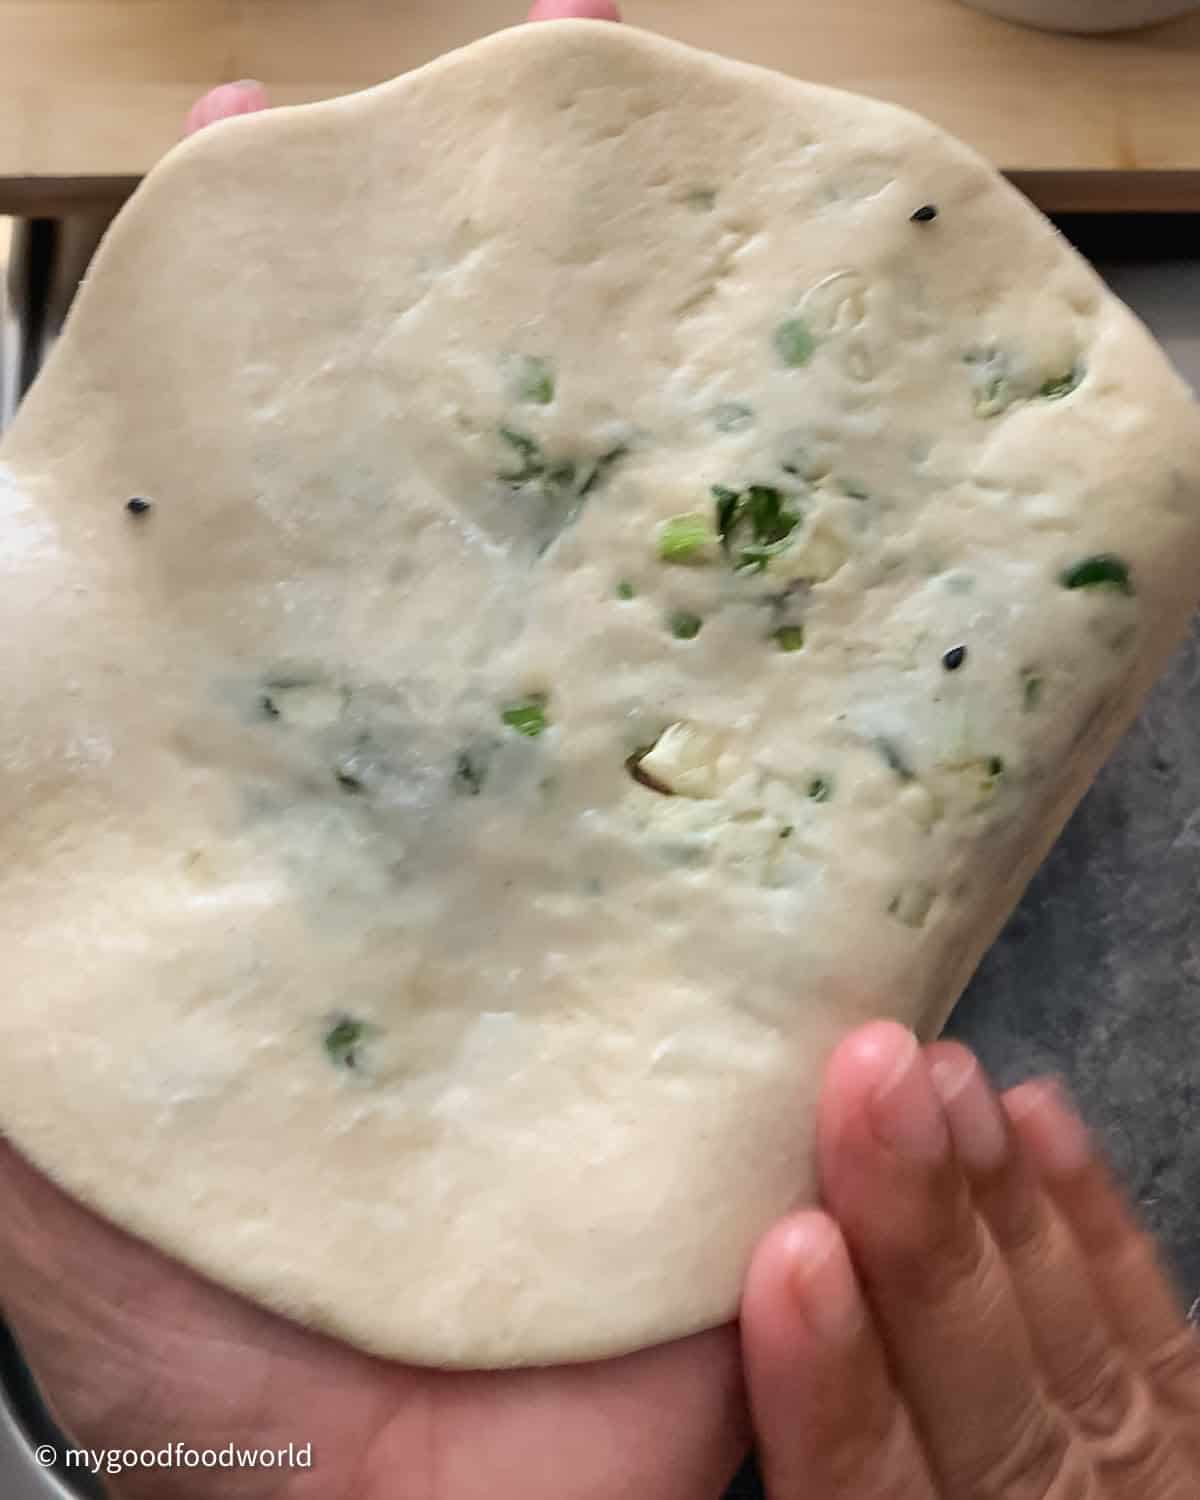 Water being applied on one side of a rolled out naan bread. The naan has specks of green on it.